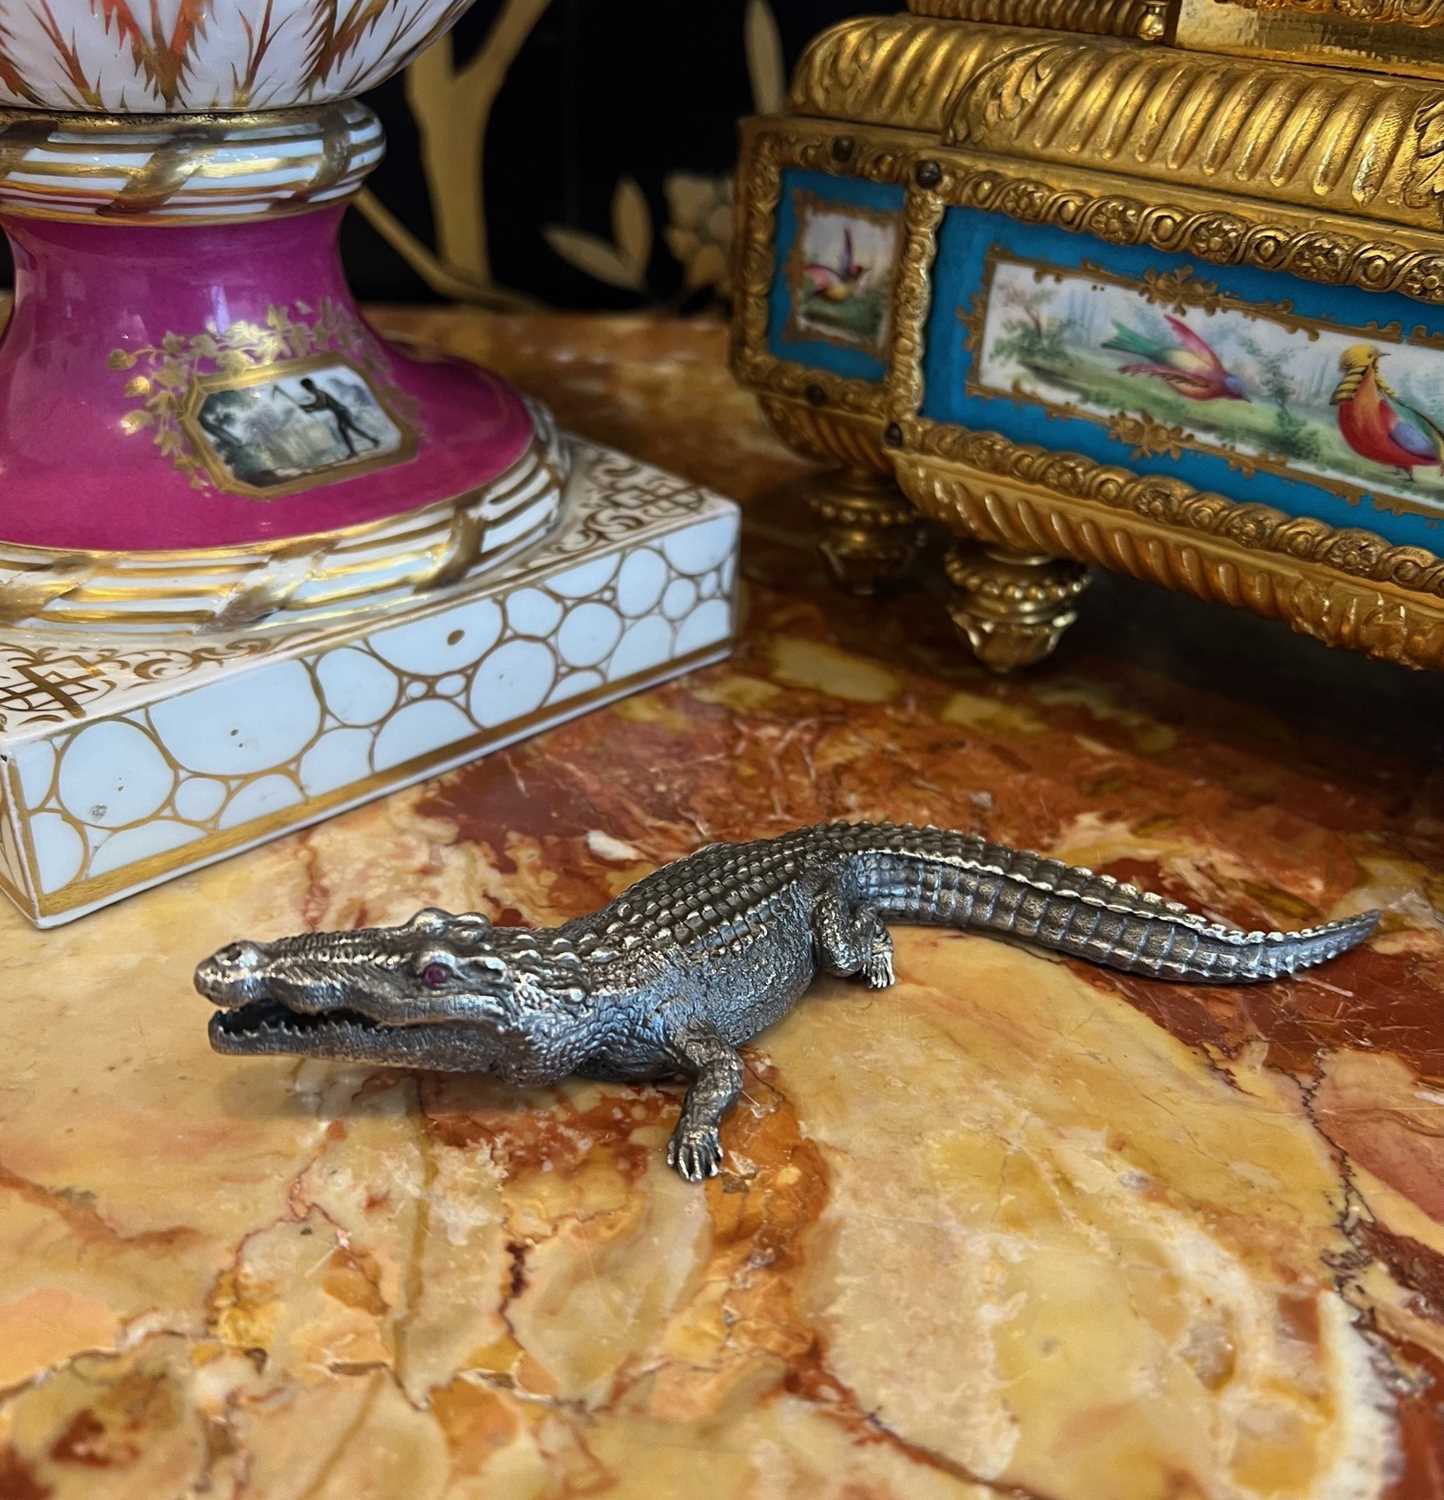 A FABERGE STYLE SOLID SILVER MODEL OF A CROCODILE - Image 4 of 10